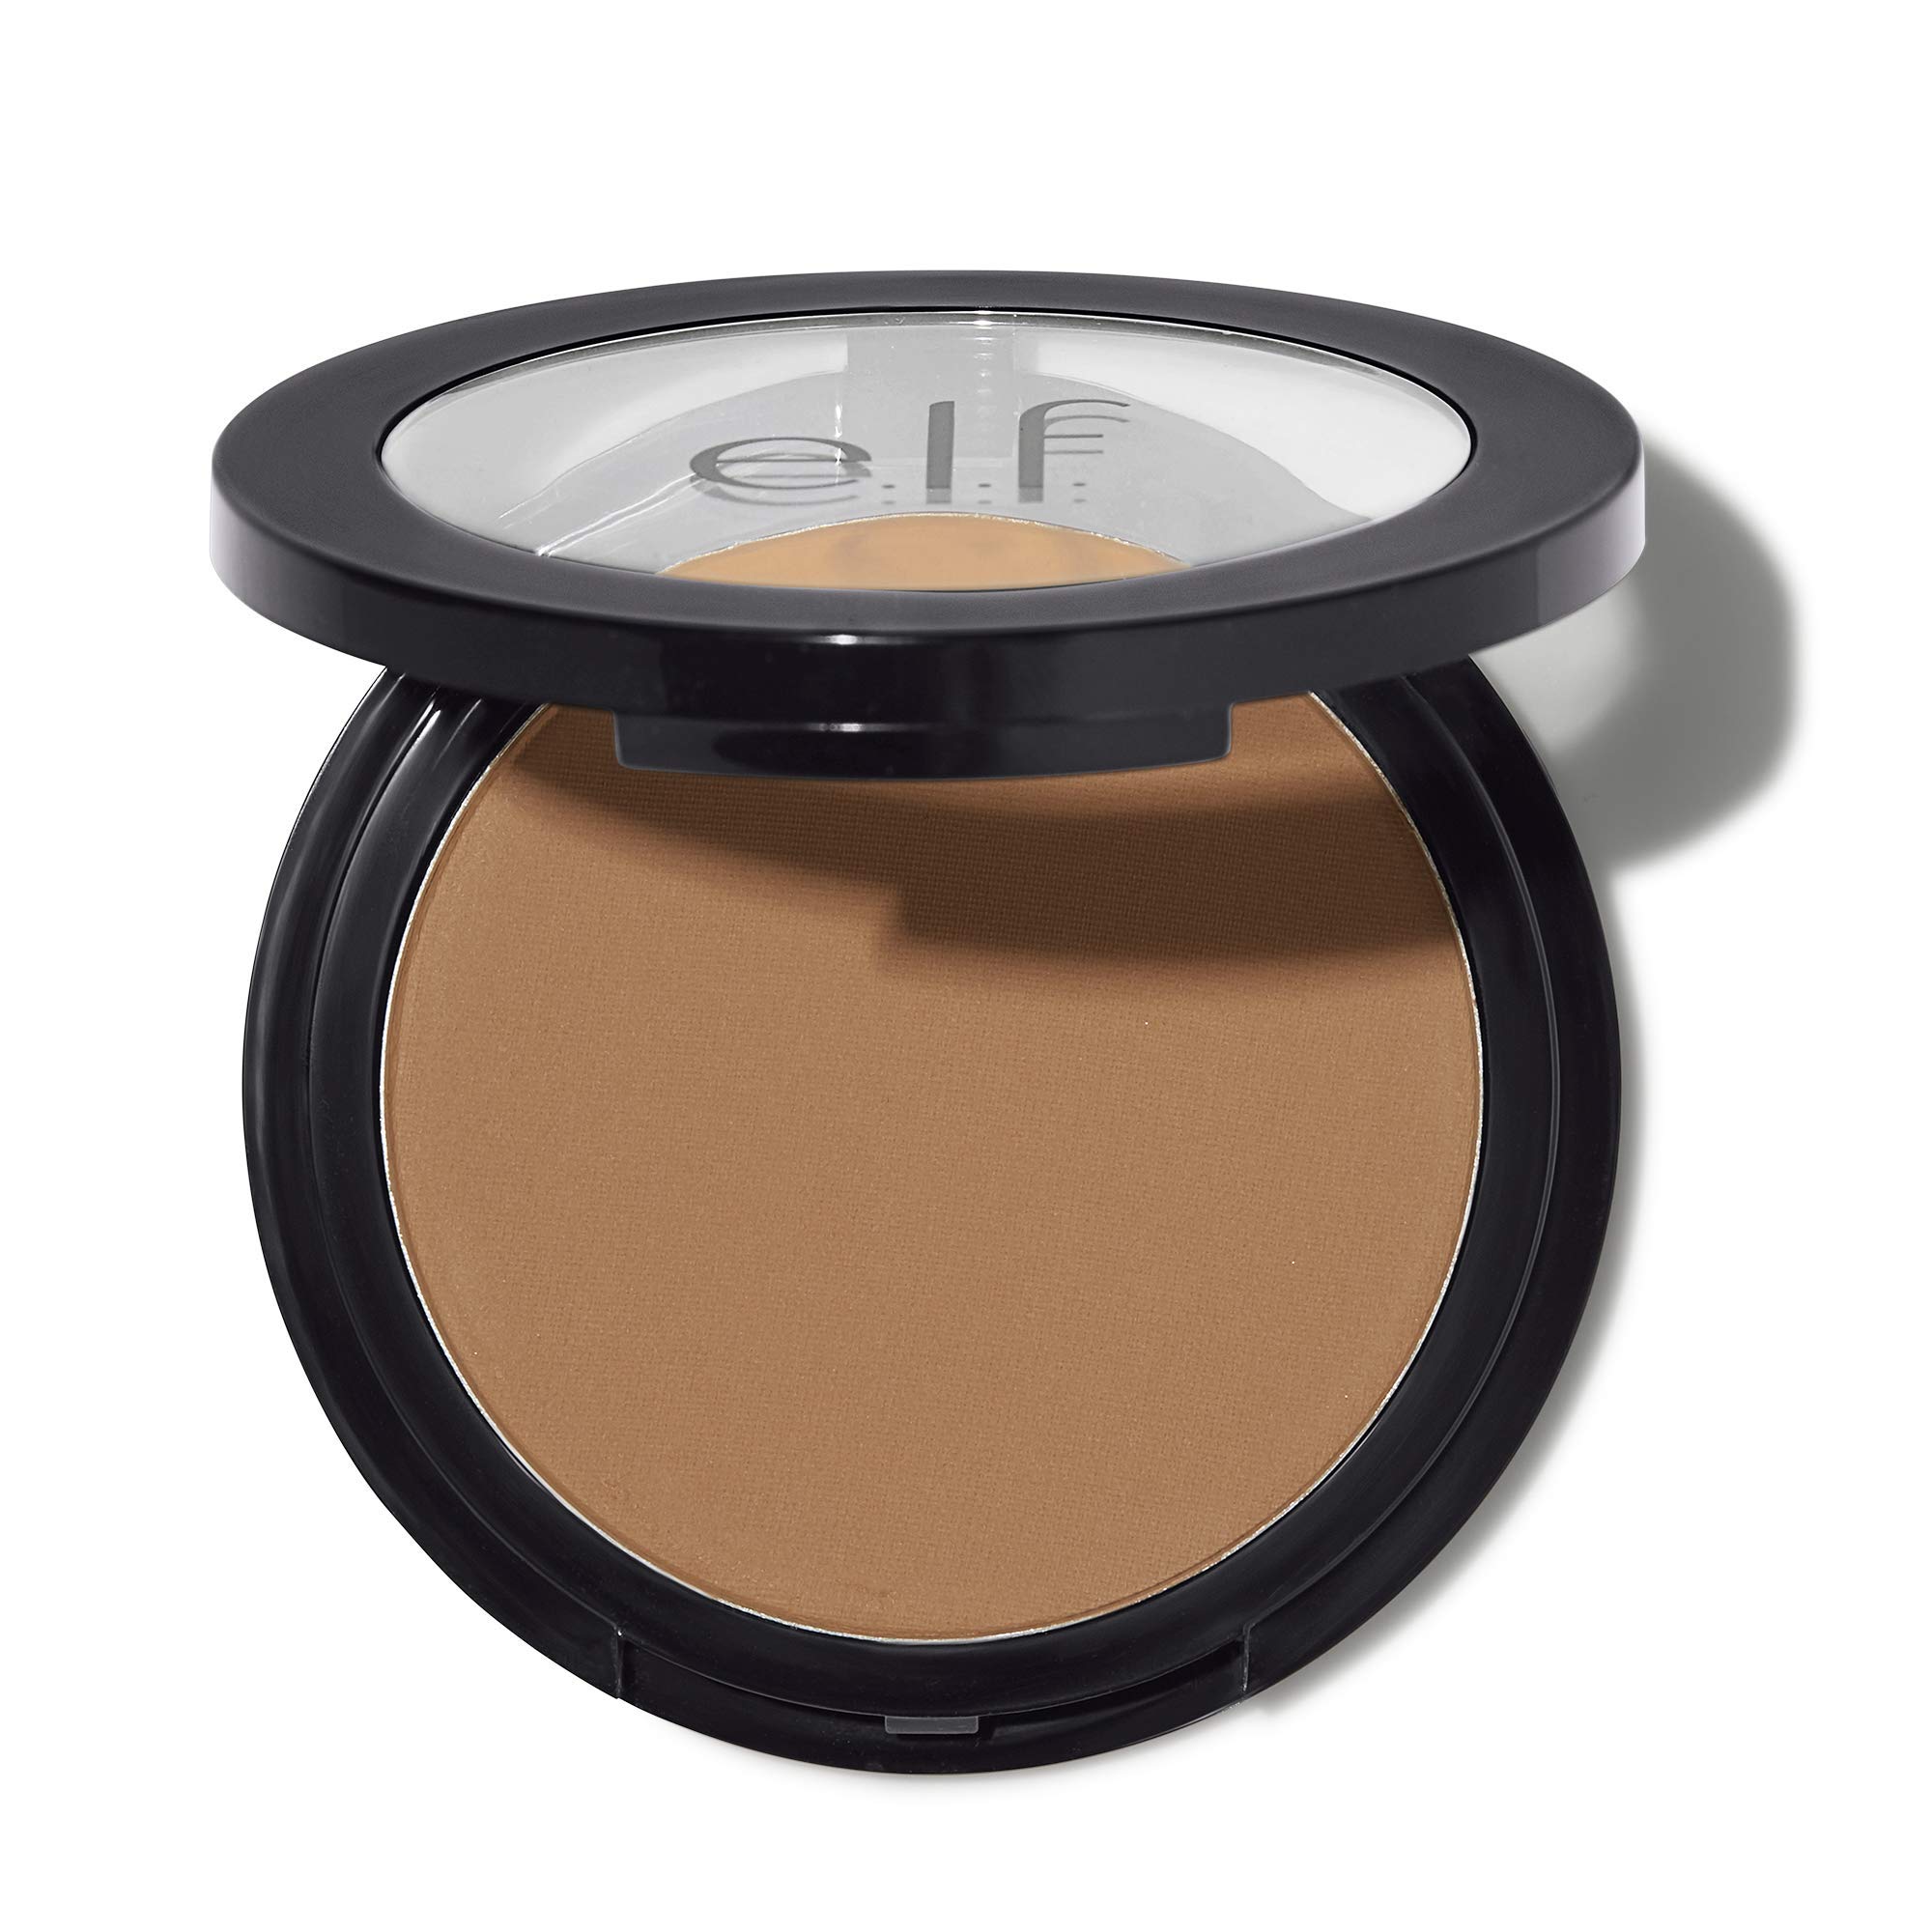 e.l.f., Primer-infused Bronzer, Long-Wear, Matte, Bold, Lightweight, Blends Easily, Contours Cheeks, Forever Sun Kissed, All-Day Wear, 0.35 Oz